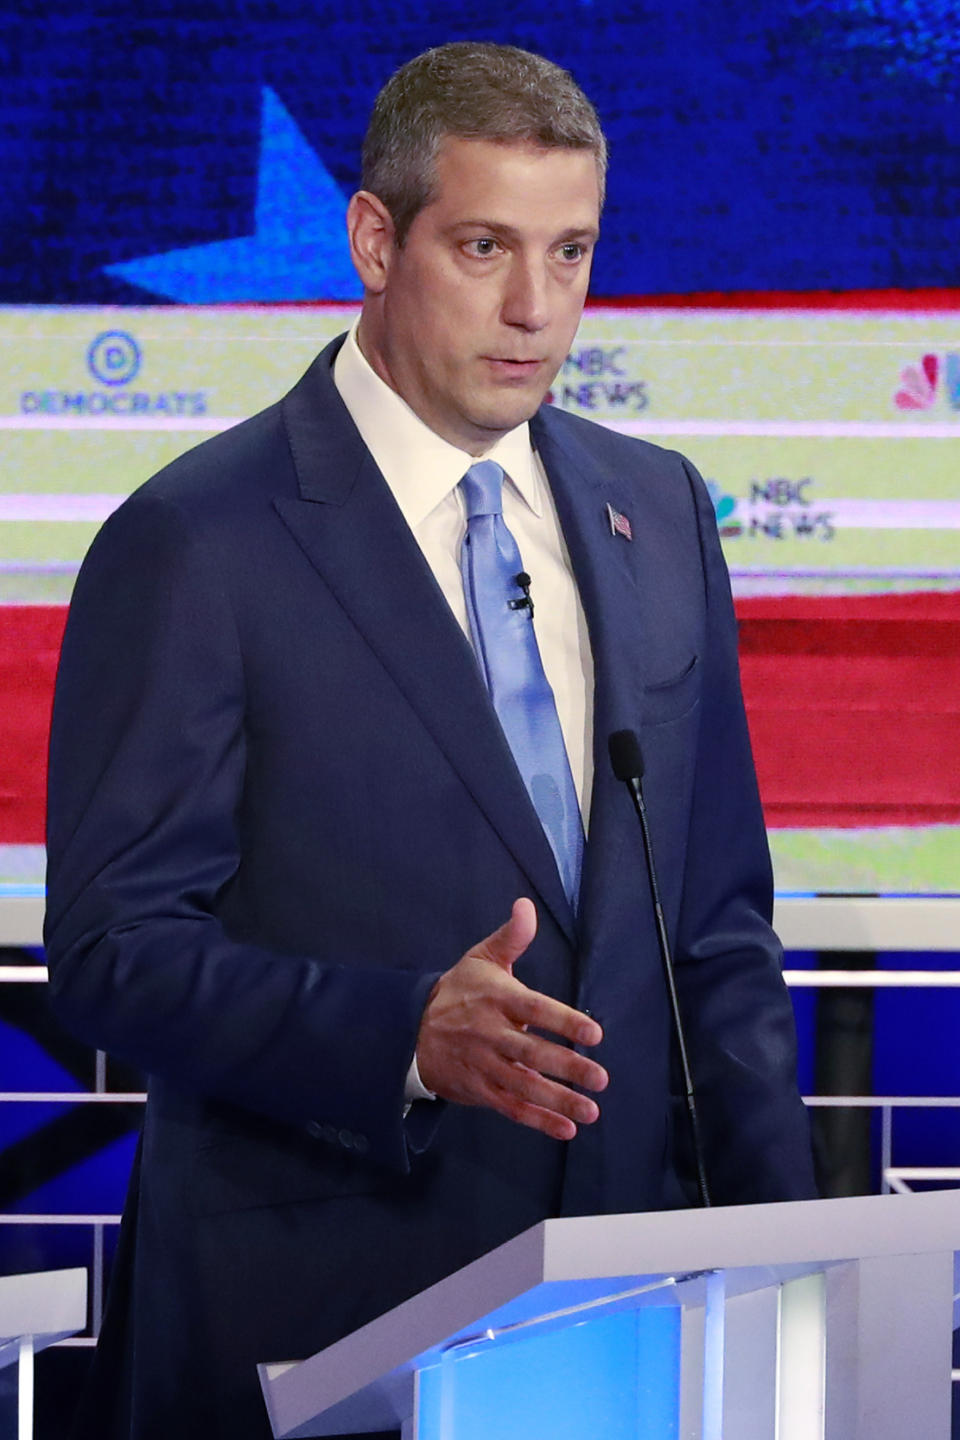 Democratic presidential candidate Rep. Tim Ryan, D-Ohio, gestures during a Democratic primary debate hosted by NBC News at the Adrienne Arsht Center for the Performing Arts, Wednesday, June 26, 2019, in Miami. (AP Photo/Wilfredo Lee)